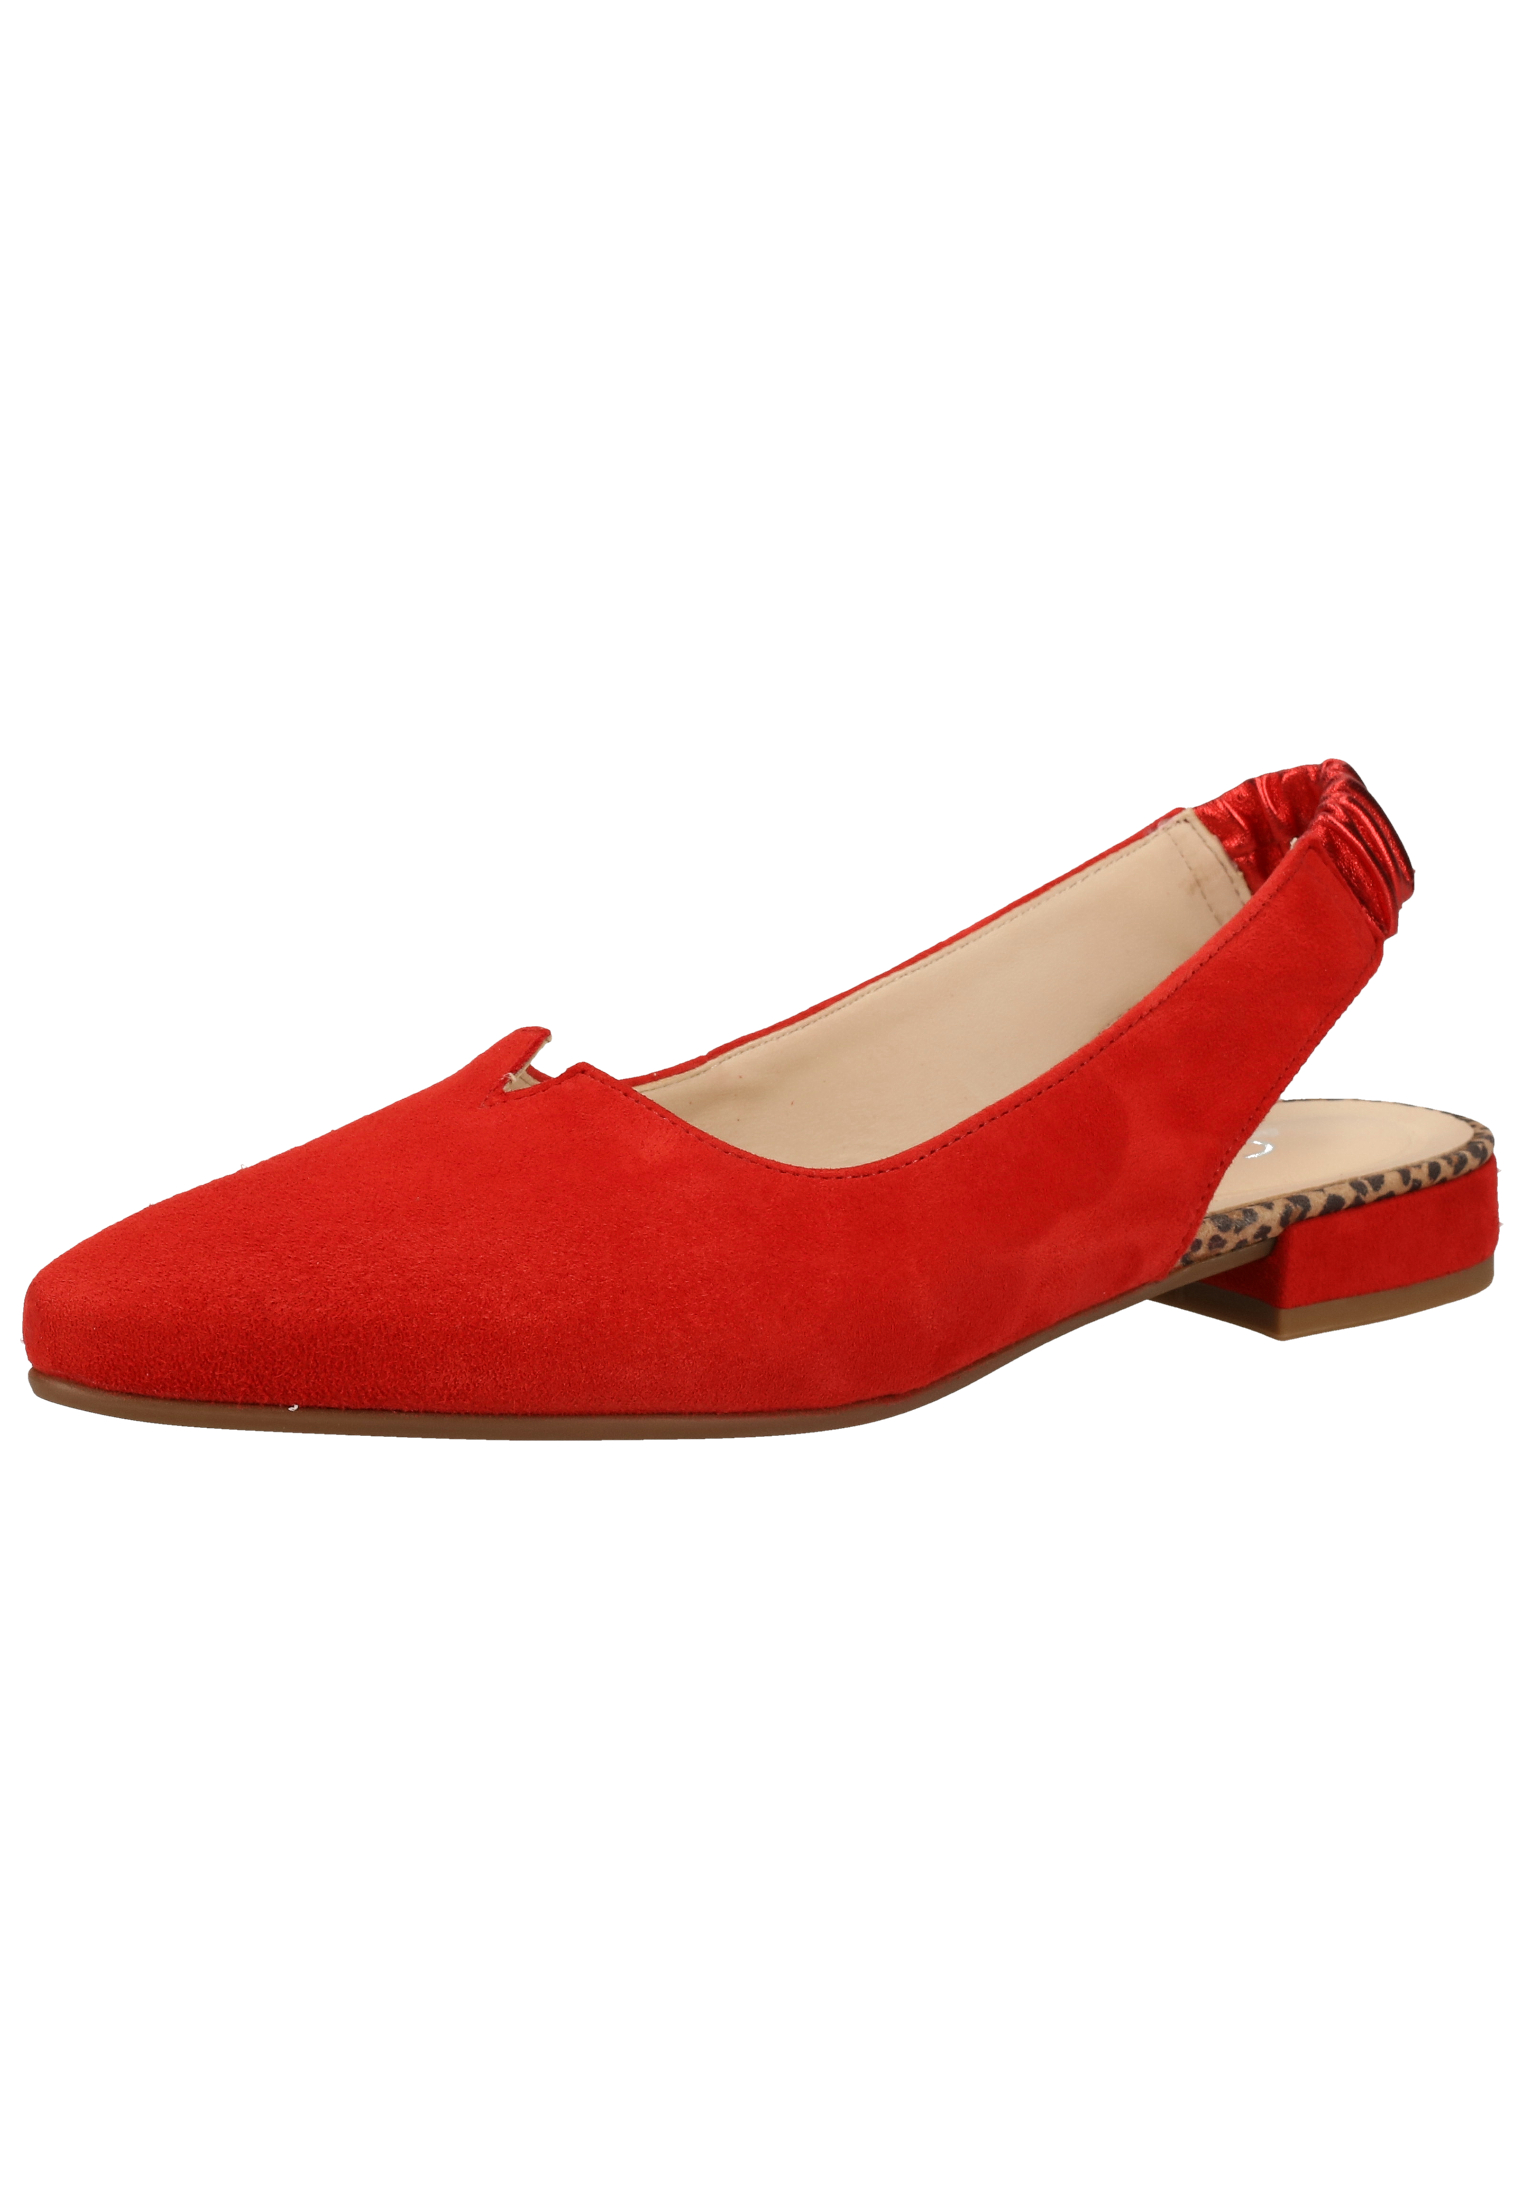 GABOR Pumps in Rot 